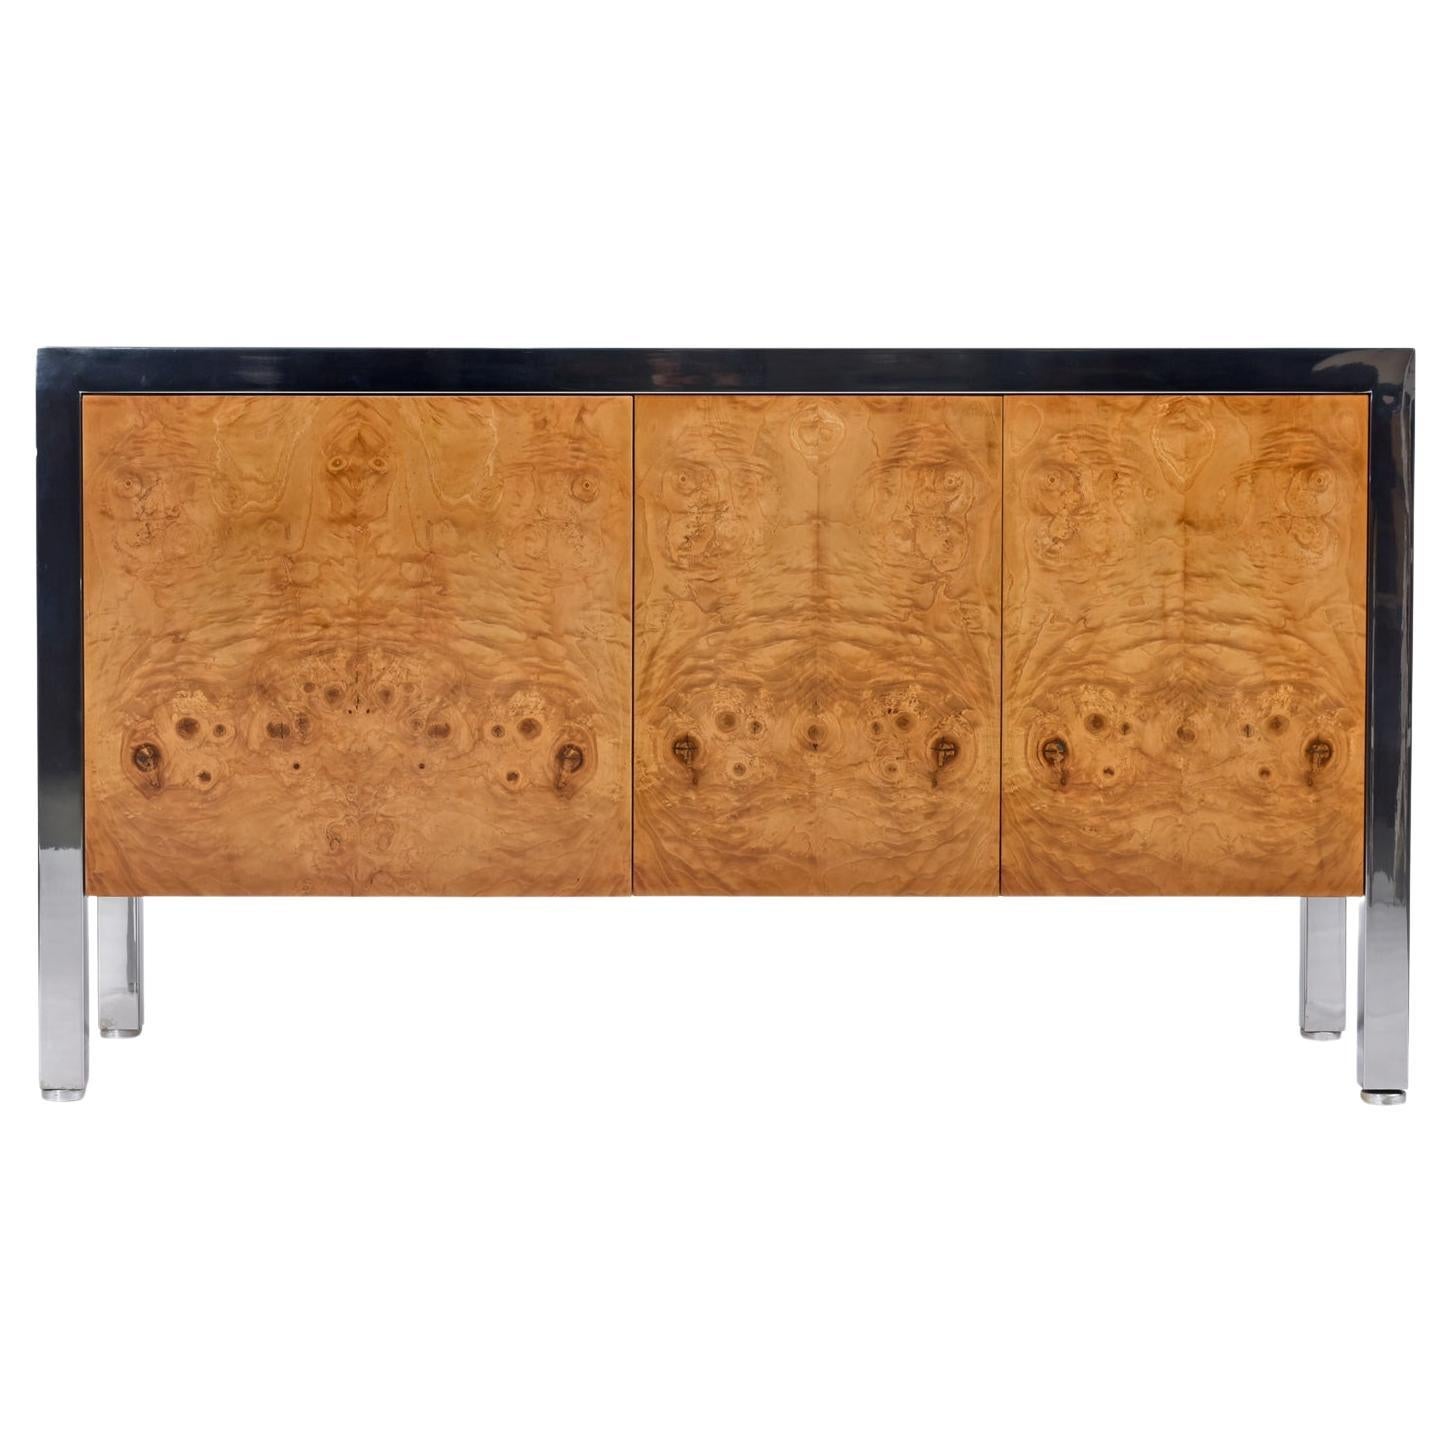 Please examine our restoration photos closely to appreciate the condition of this captivating credenza by Leon Rosen for Pace Collection. We're certain you won't find a finer example anywhere. All burl wood panels have been professionally,